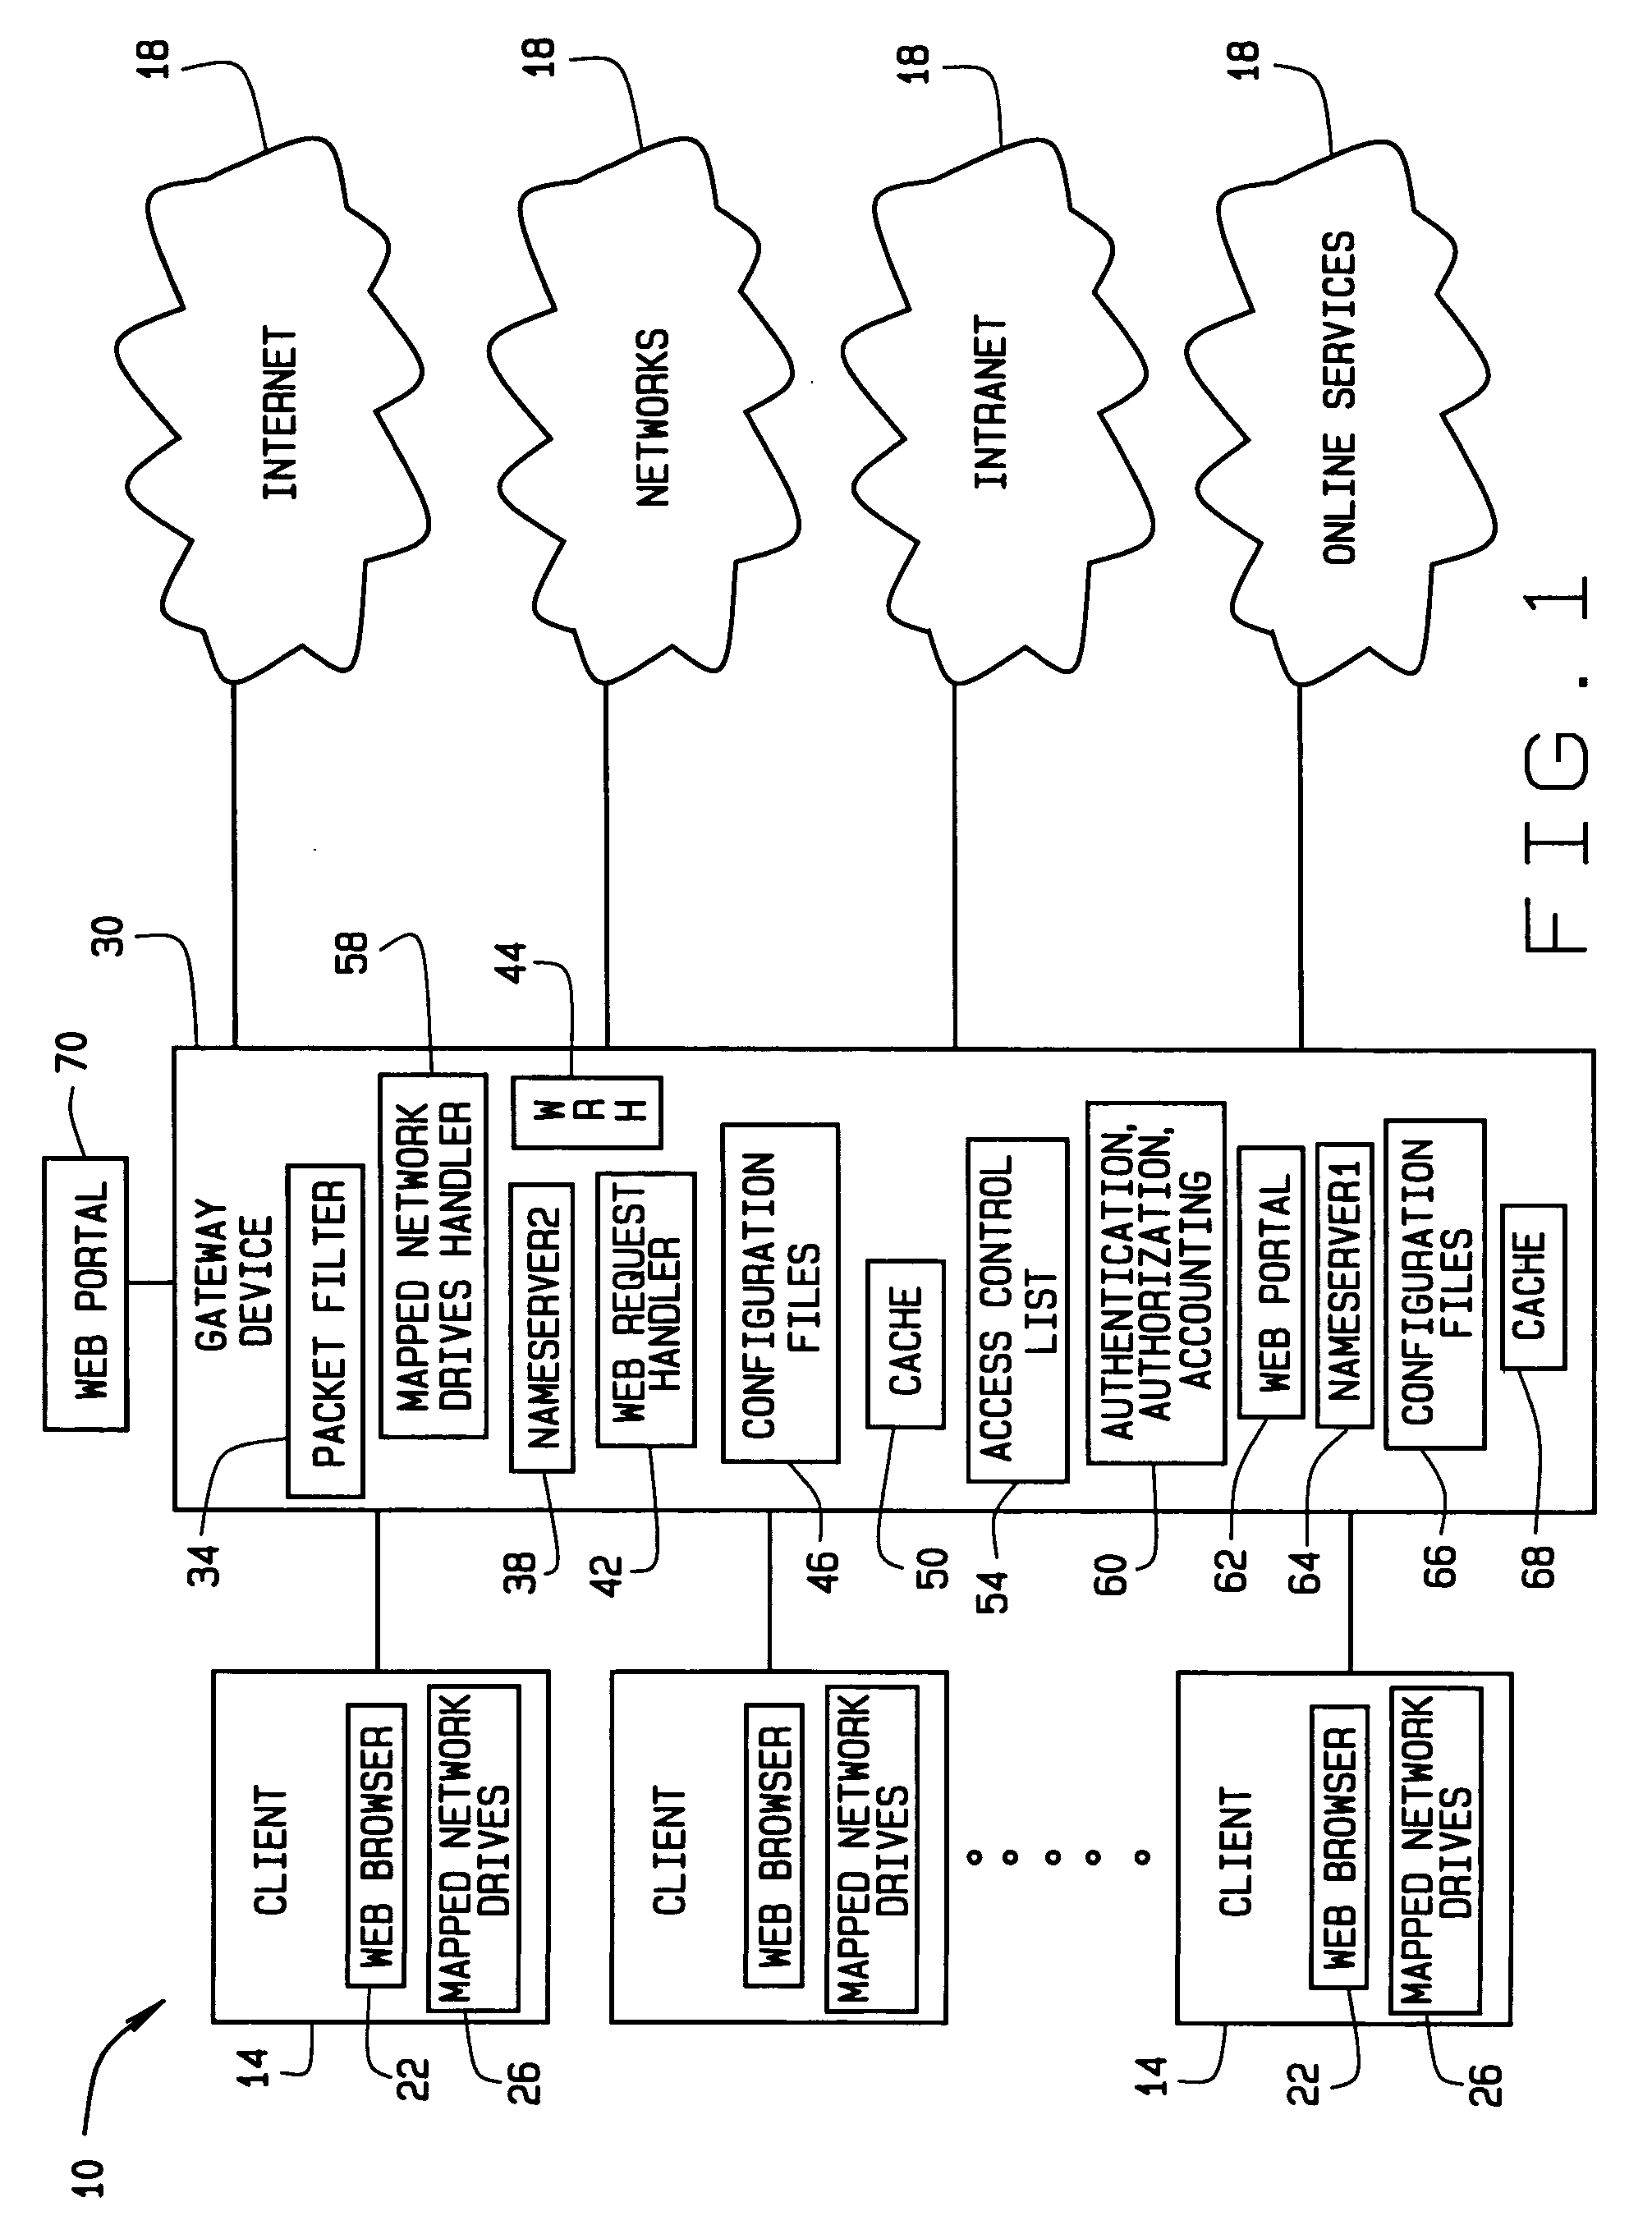 Apparatus and methods for transparent handling of browser proxy configurations in a network gateway device